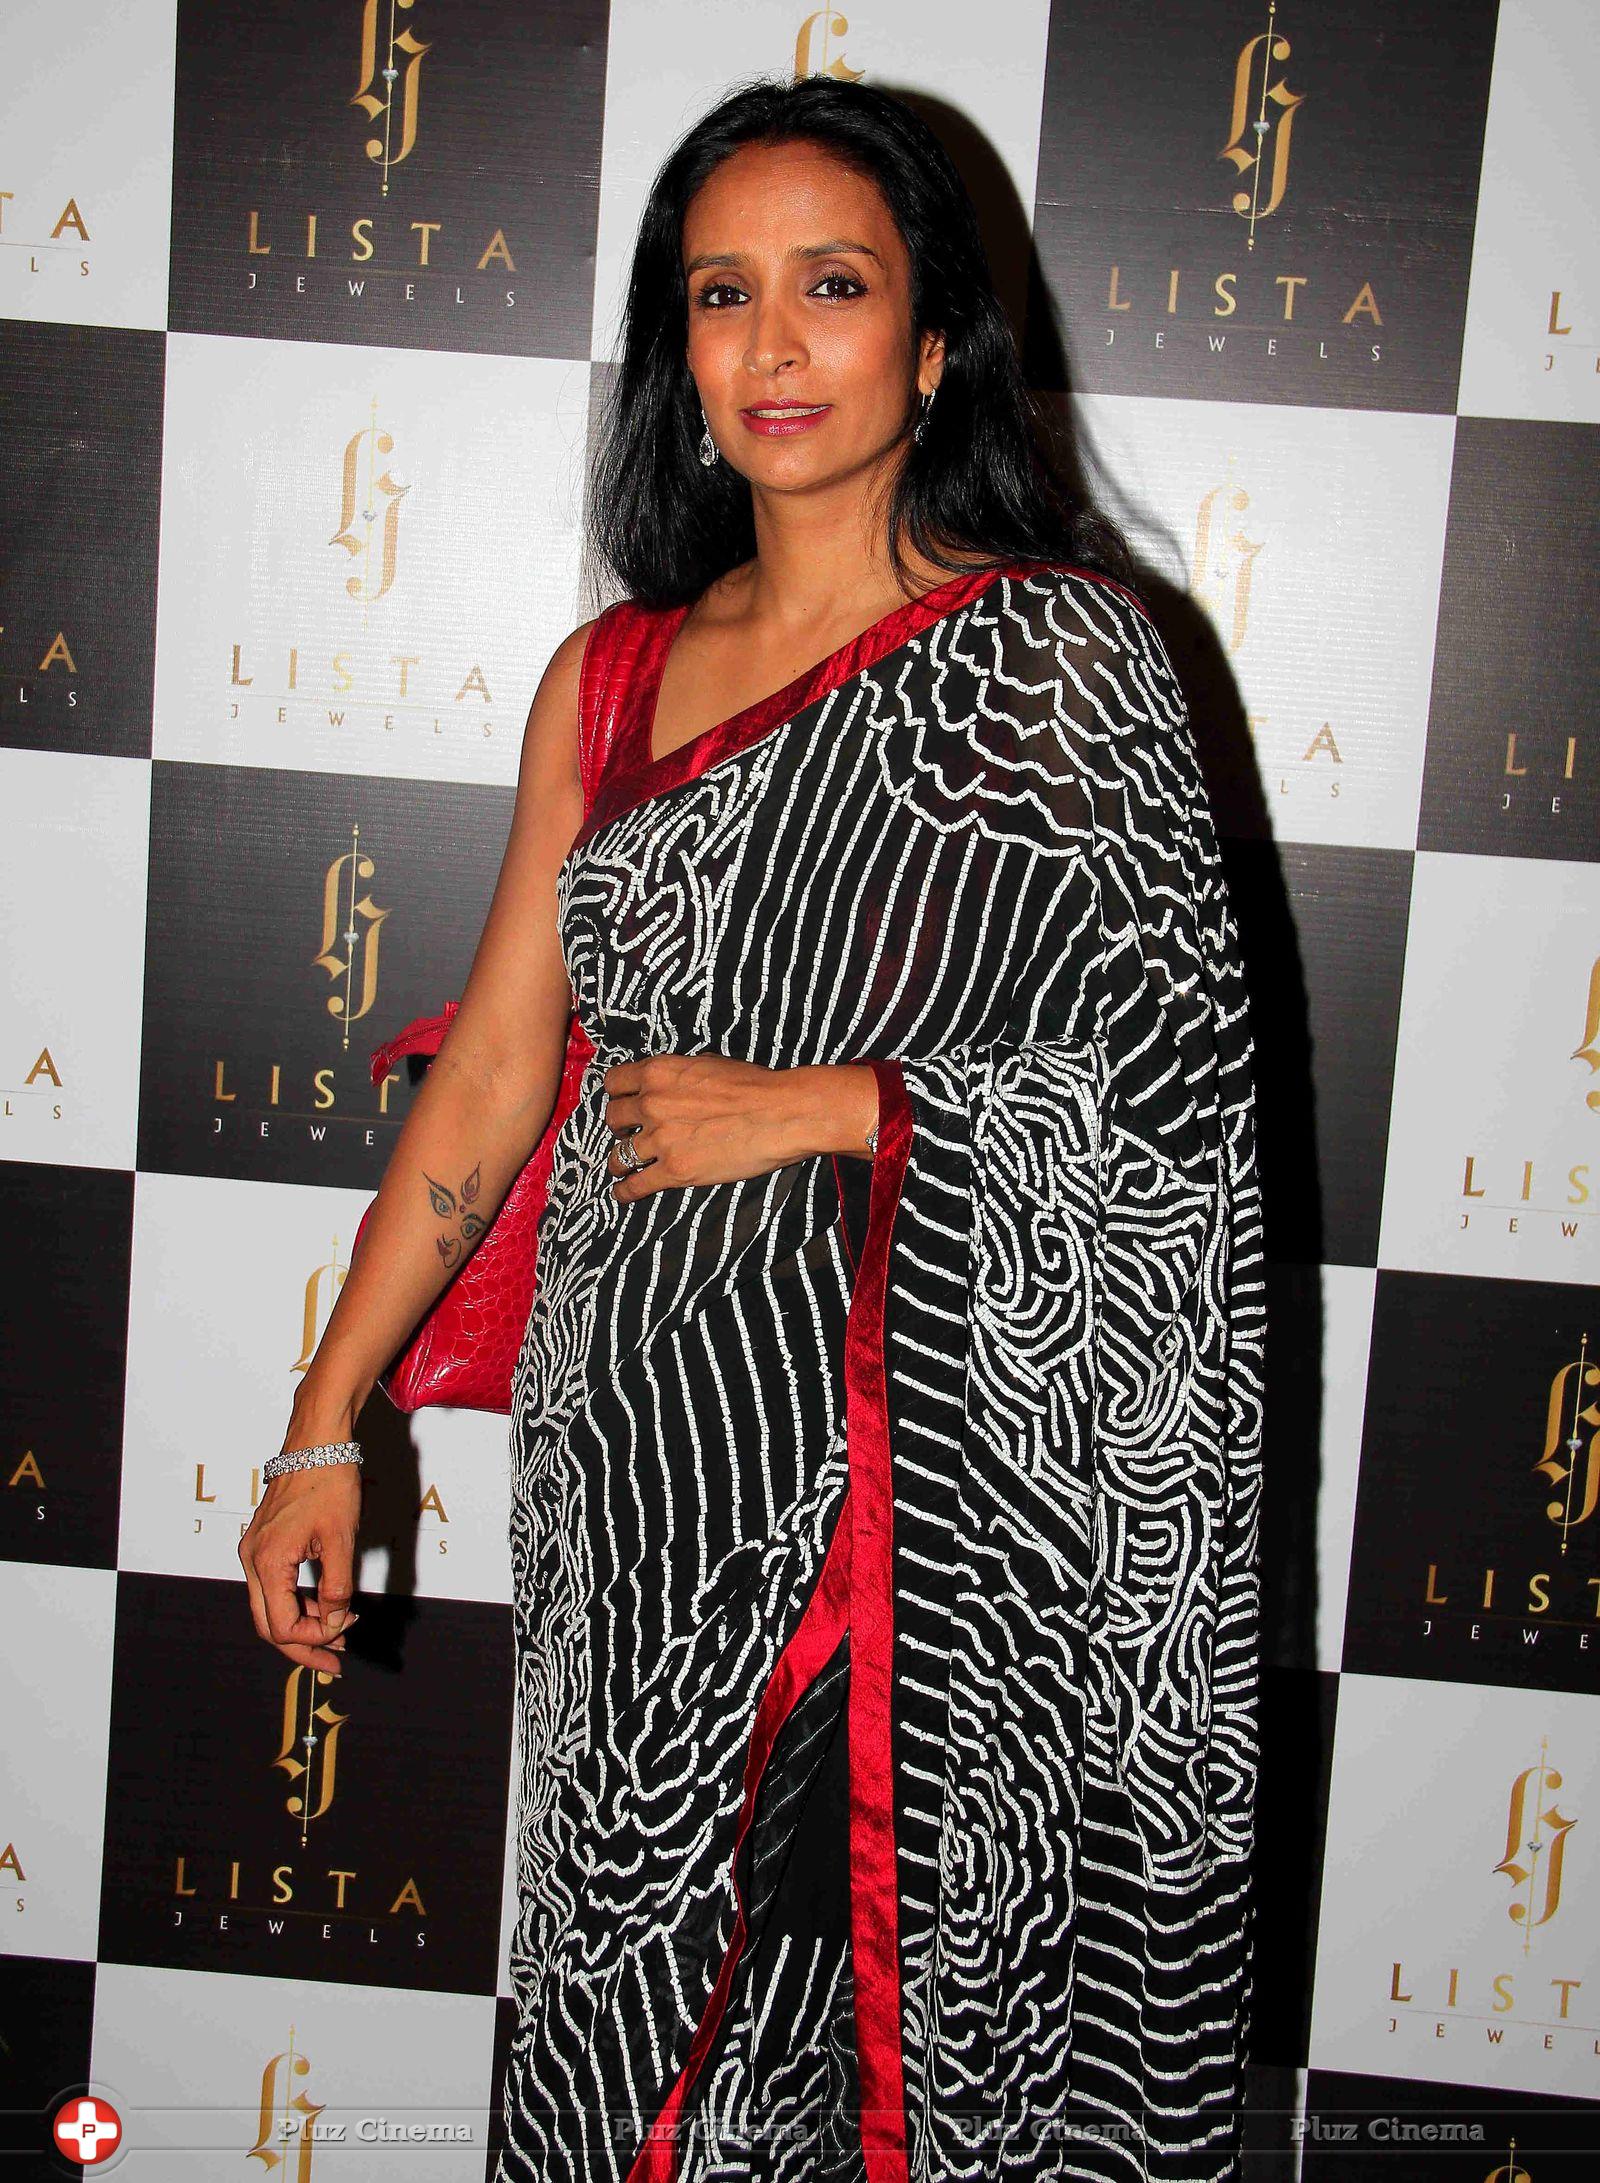 Suchitra Pillai-Malik - Shahrukh Khan & Others at The Launch of Lista Jewellery Store Photos | Picture 622856